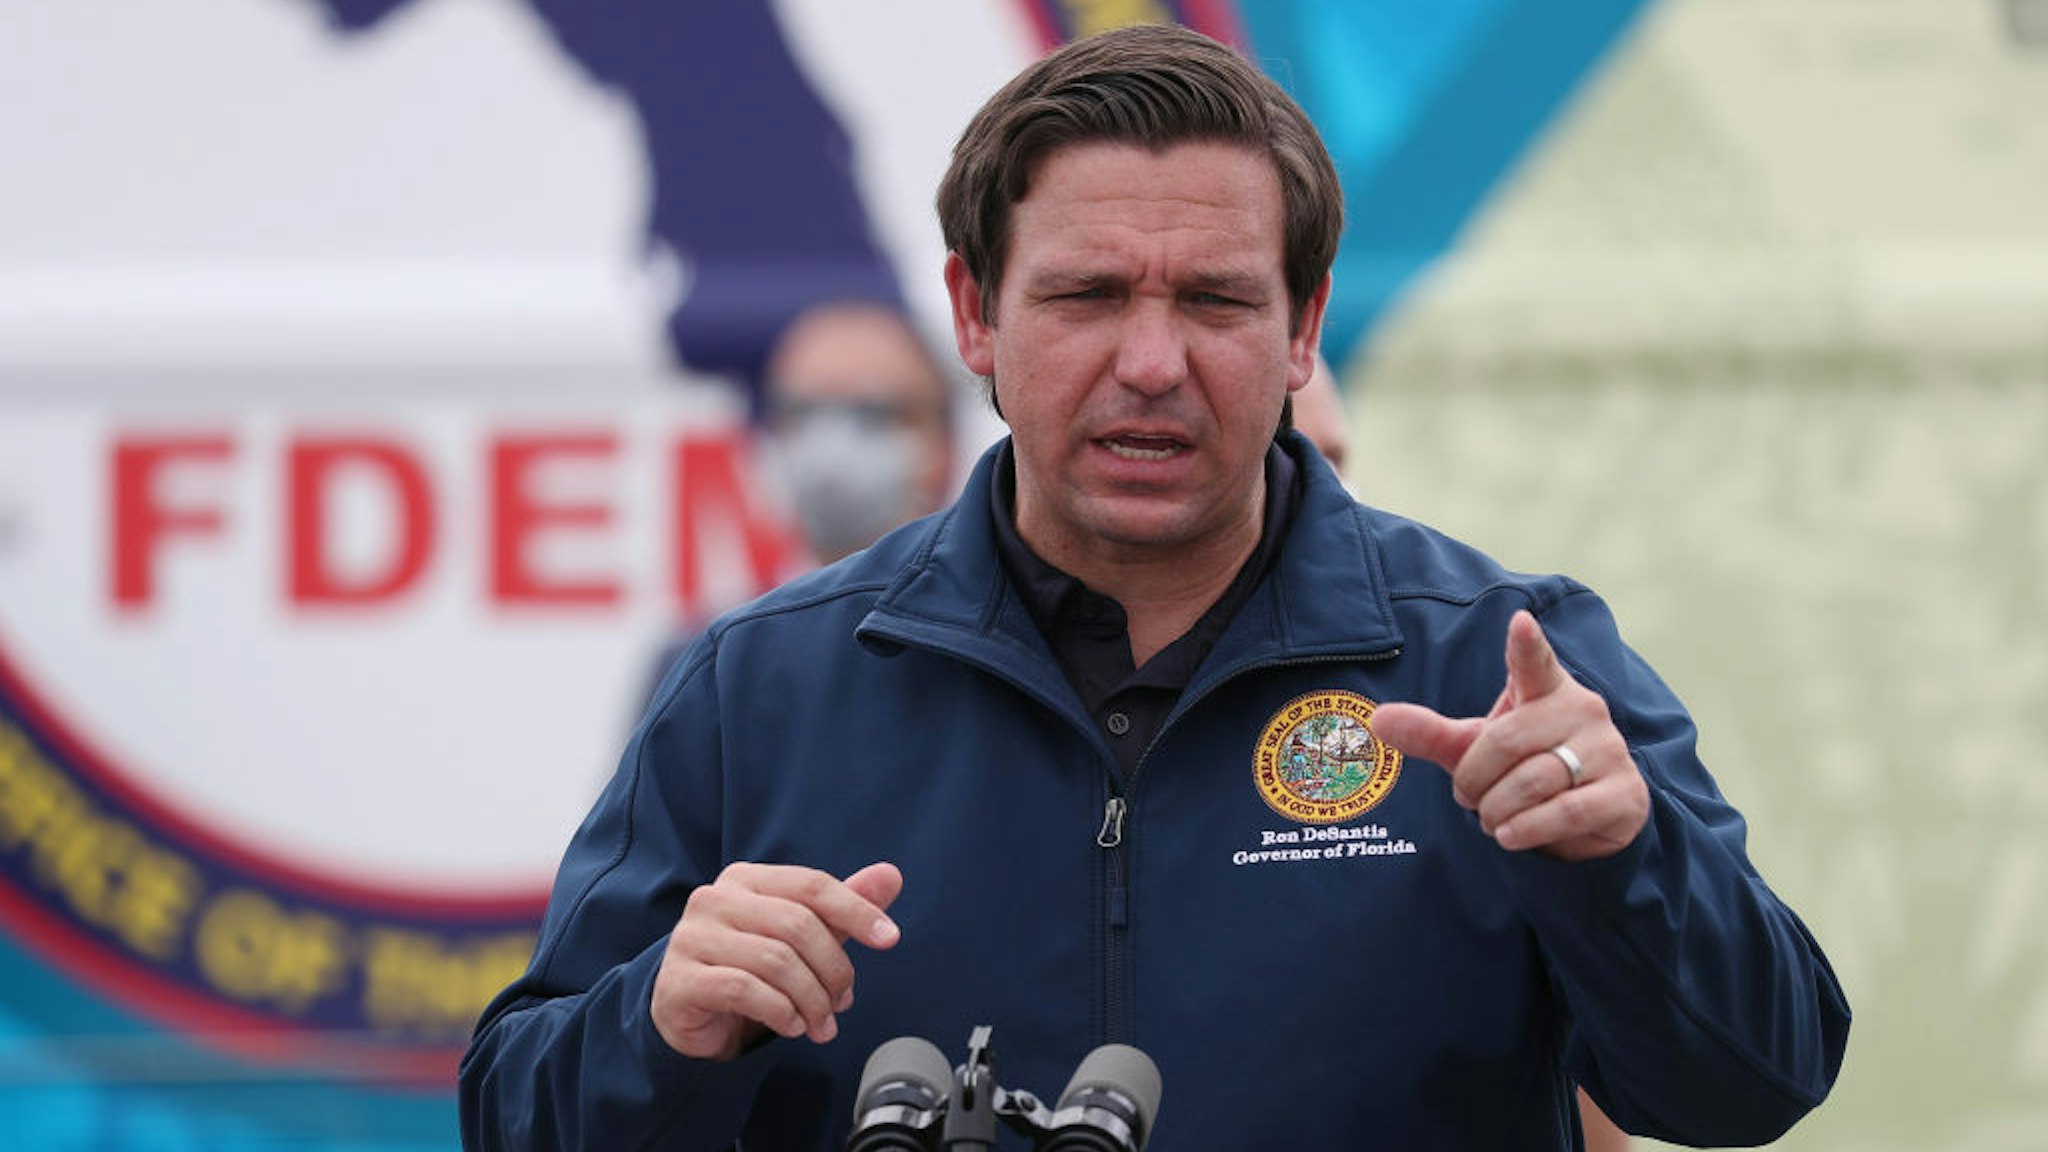 Florida Gov. Ron DeSantis speaks during a press conference at the Hard Rock Stadium testing site on May 06, 2020 in Miami Gardens, Florida.